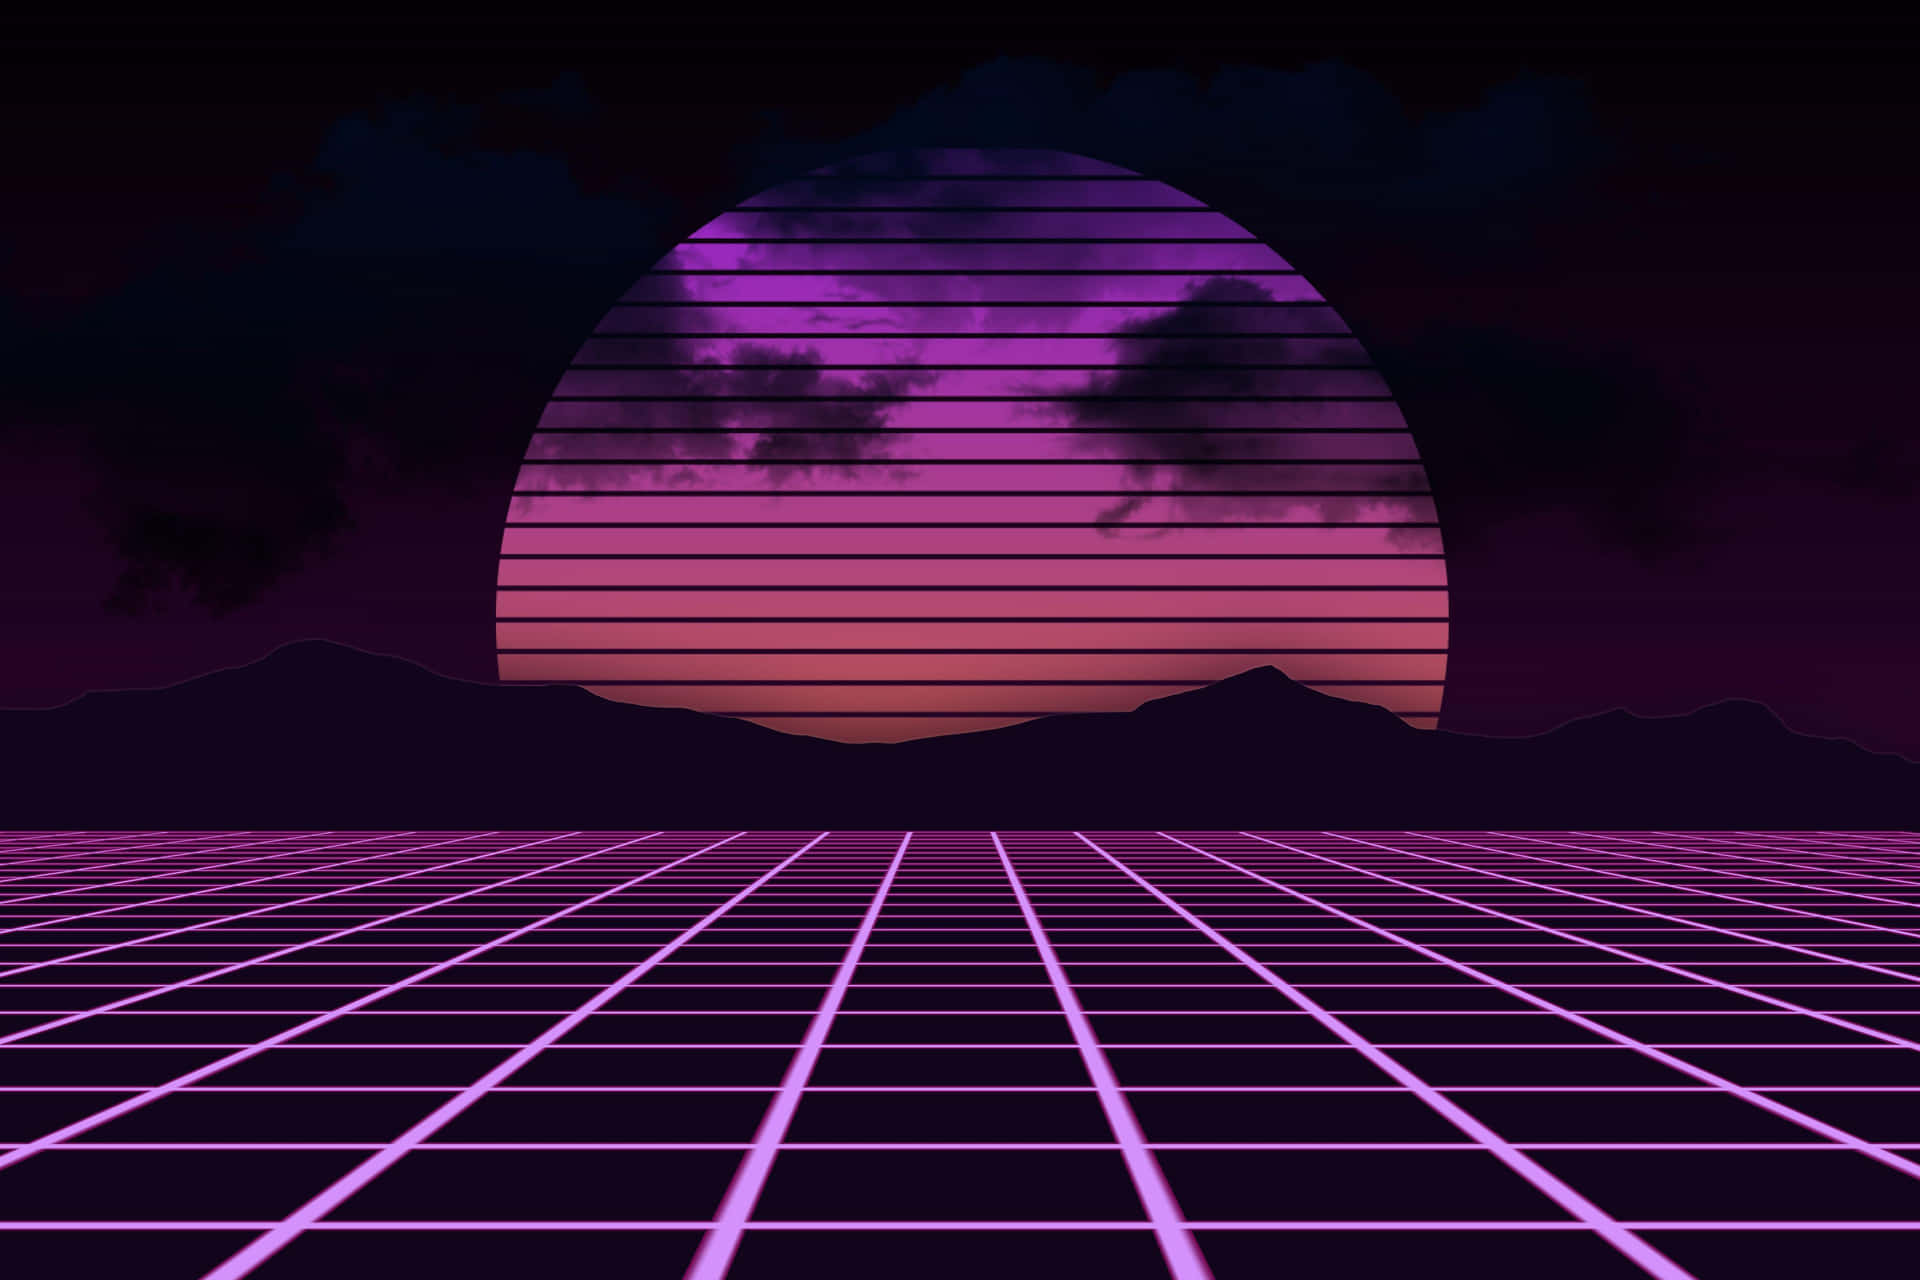 “Dive into a world of neon dreams with Retrowave!”